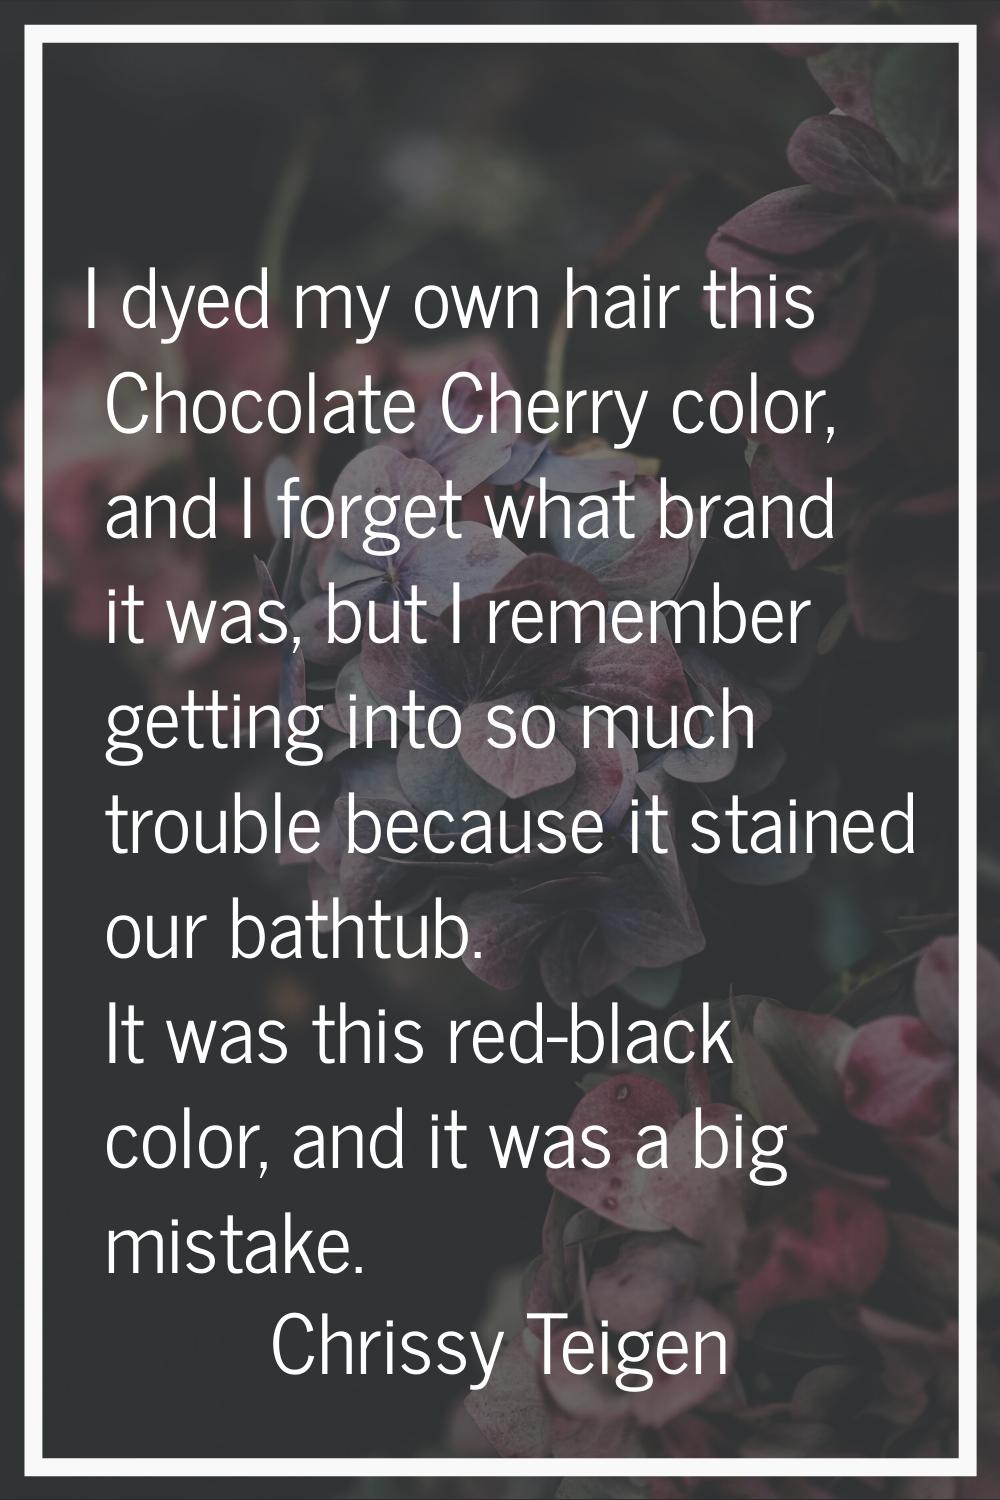 I dyed my own hair this Chocolate Cherry color, and I forget what brand it was, but I remember gett